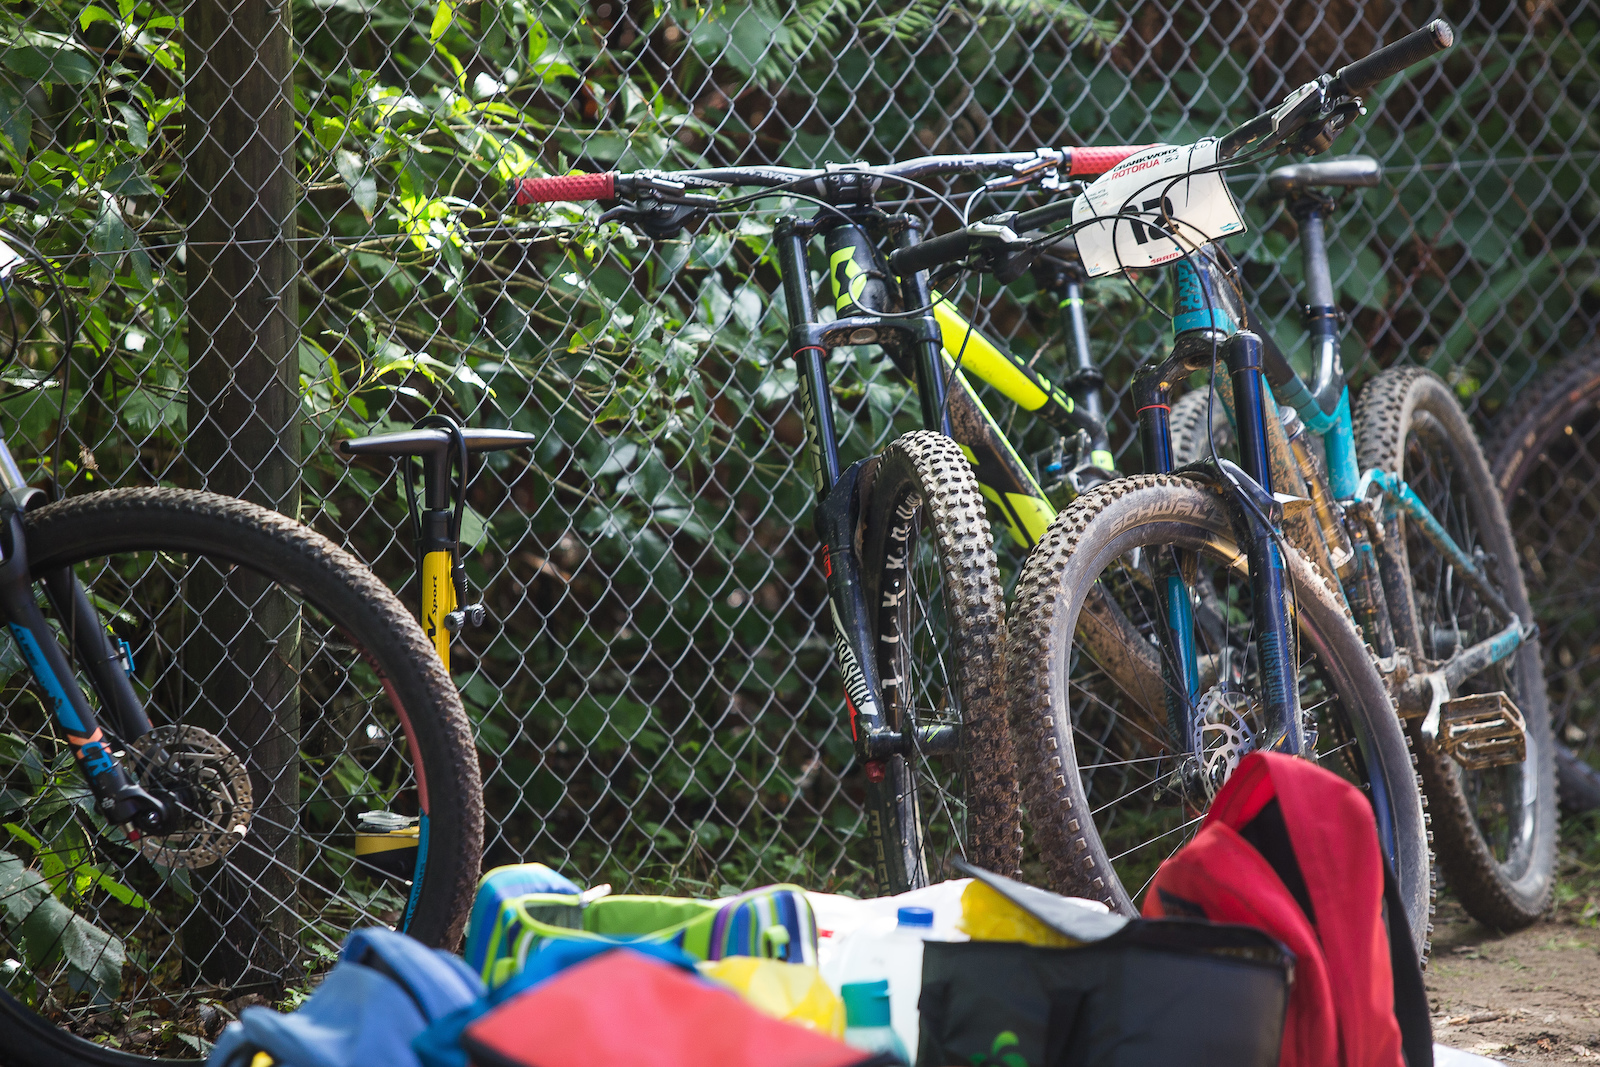 Bikes all over at the Professionals Rotorua National Schools MTB Championships Presented by Altherm Window Systems. Credit: Fraser Britton / Crankworx